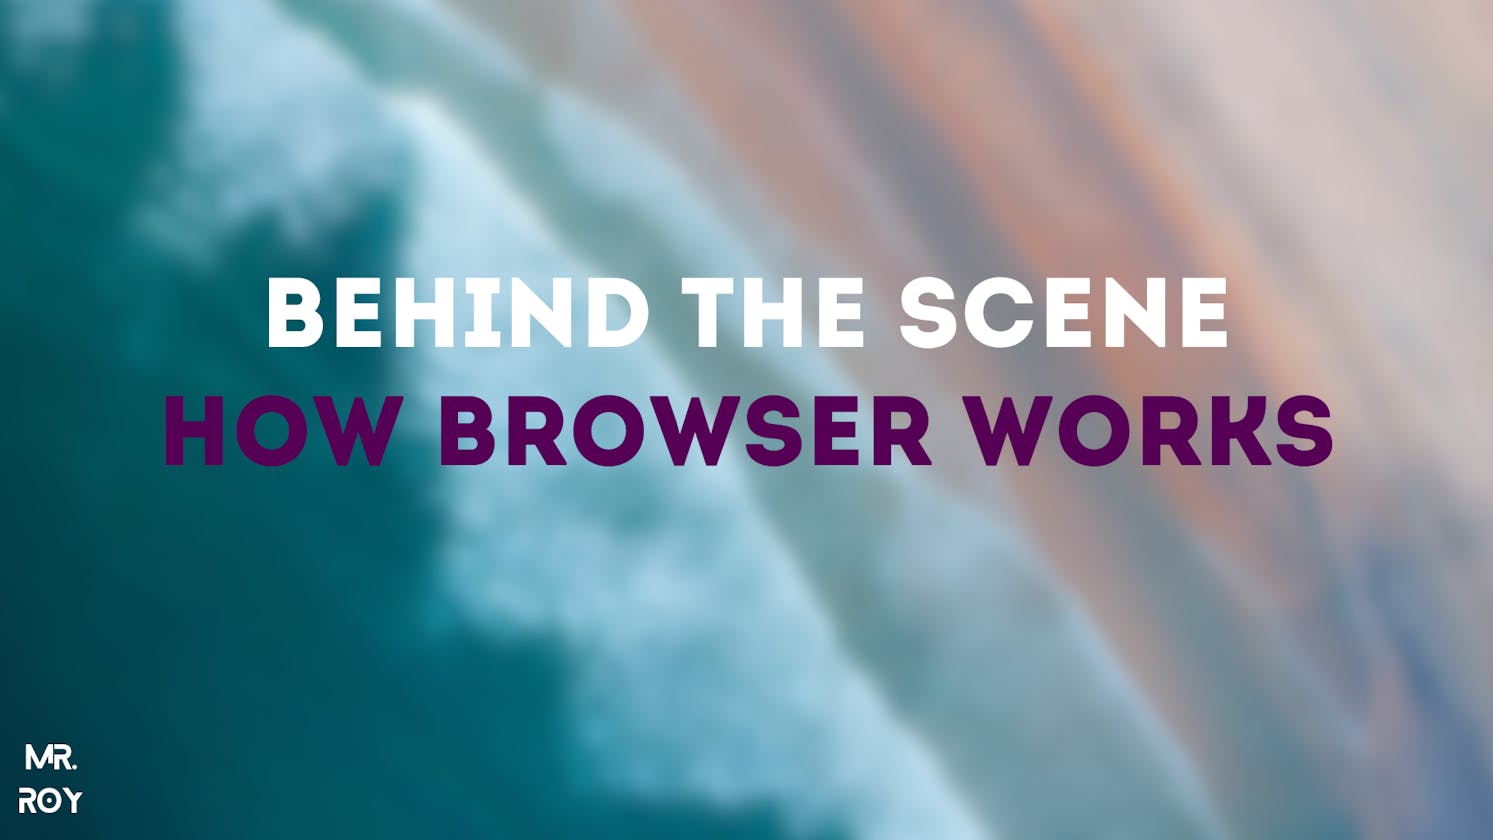 What Happens When You Hit a URL on a Browser?